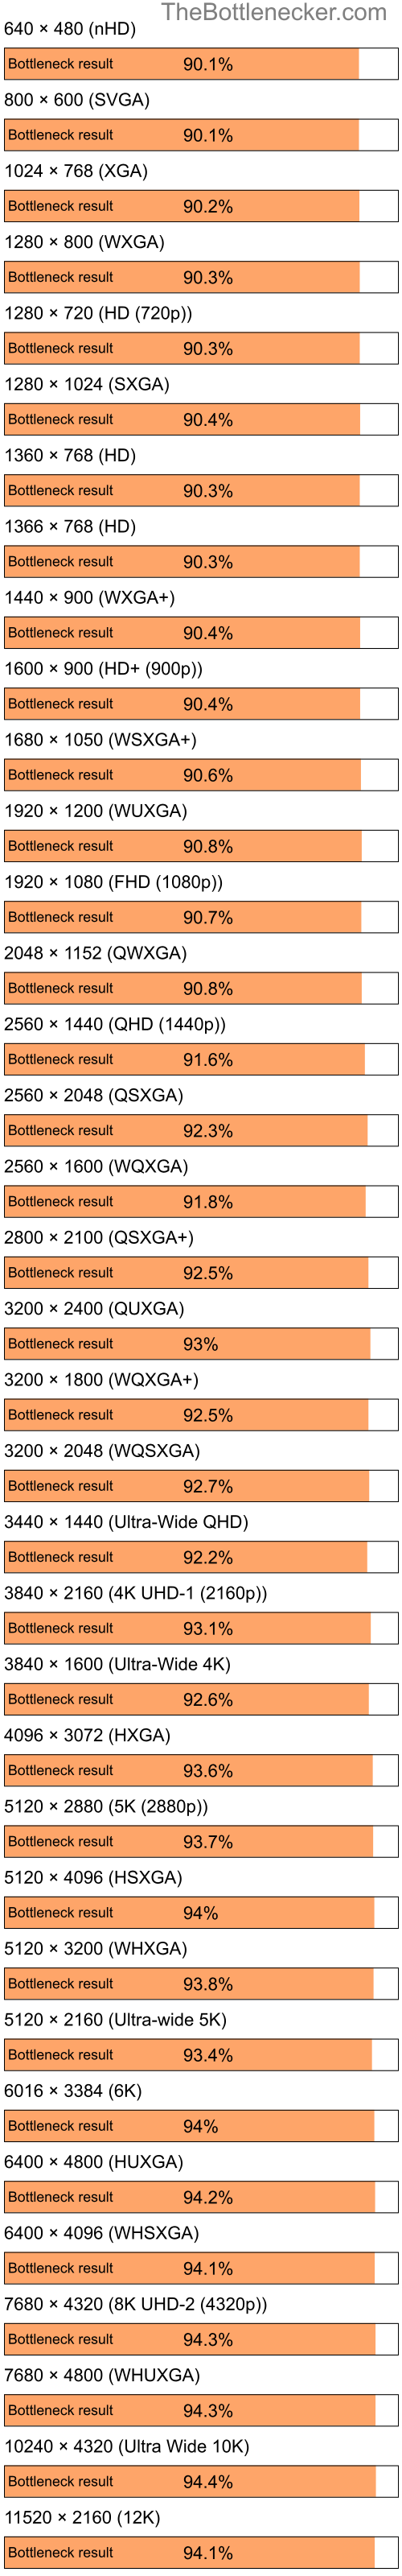 Bottleneck results by resolution for Intel Atom Z520 and AMD Mobility Radeon 9000 in General Tasks